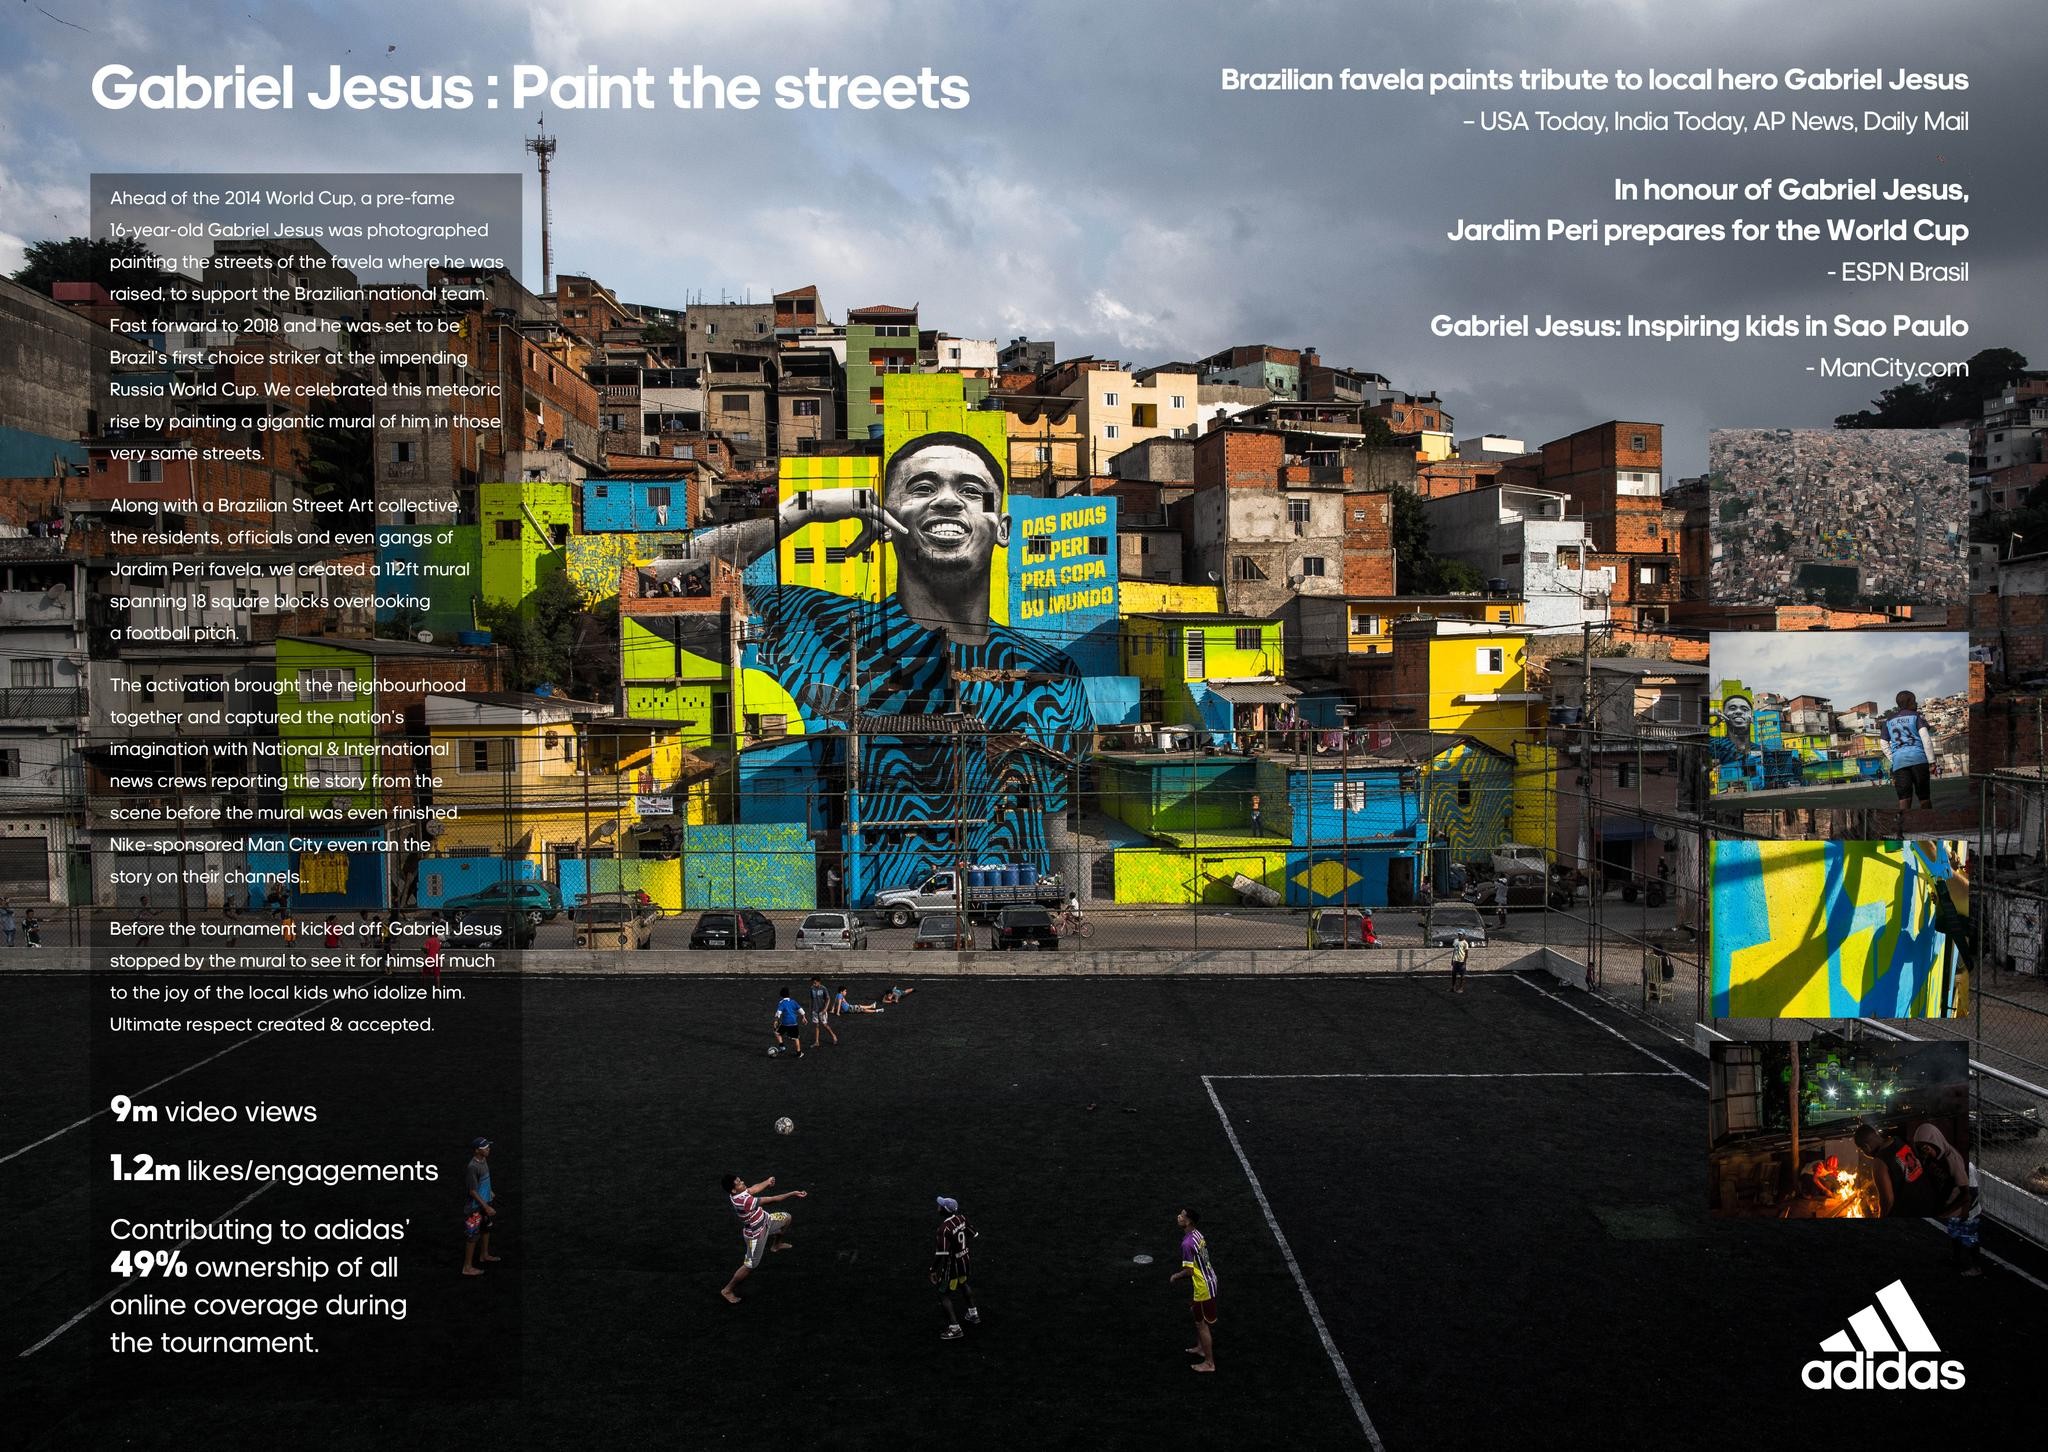 Paint the Streets: The Gabriel Jesus Mural